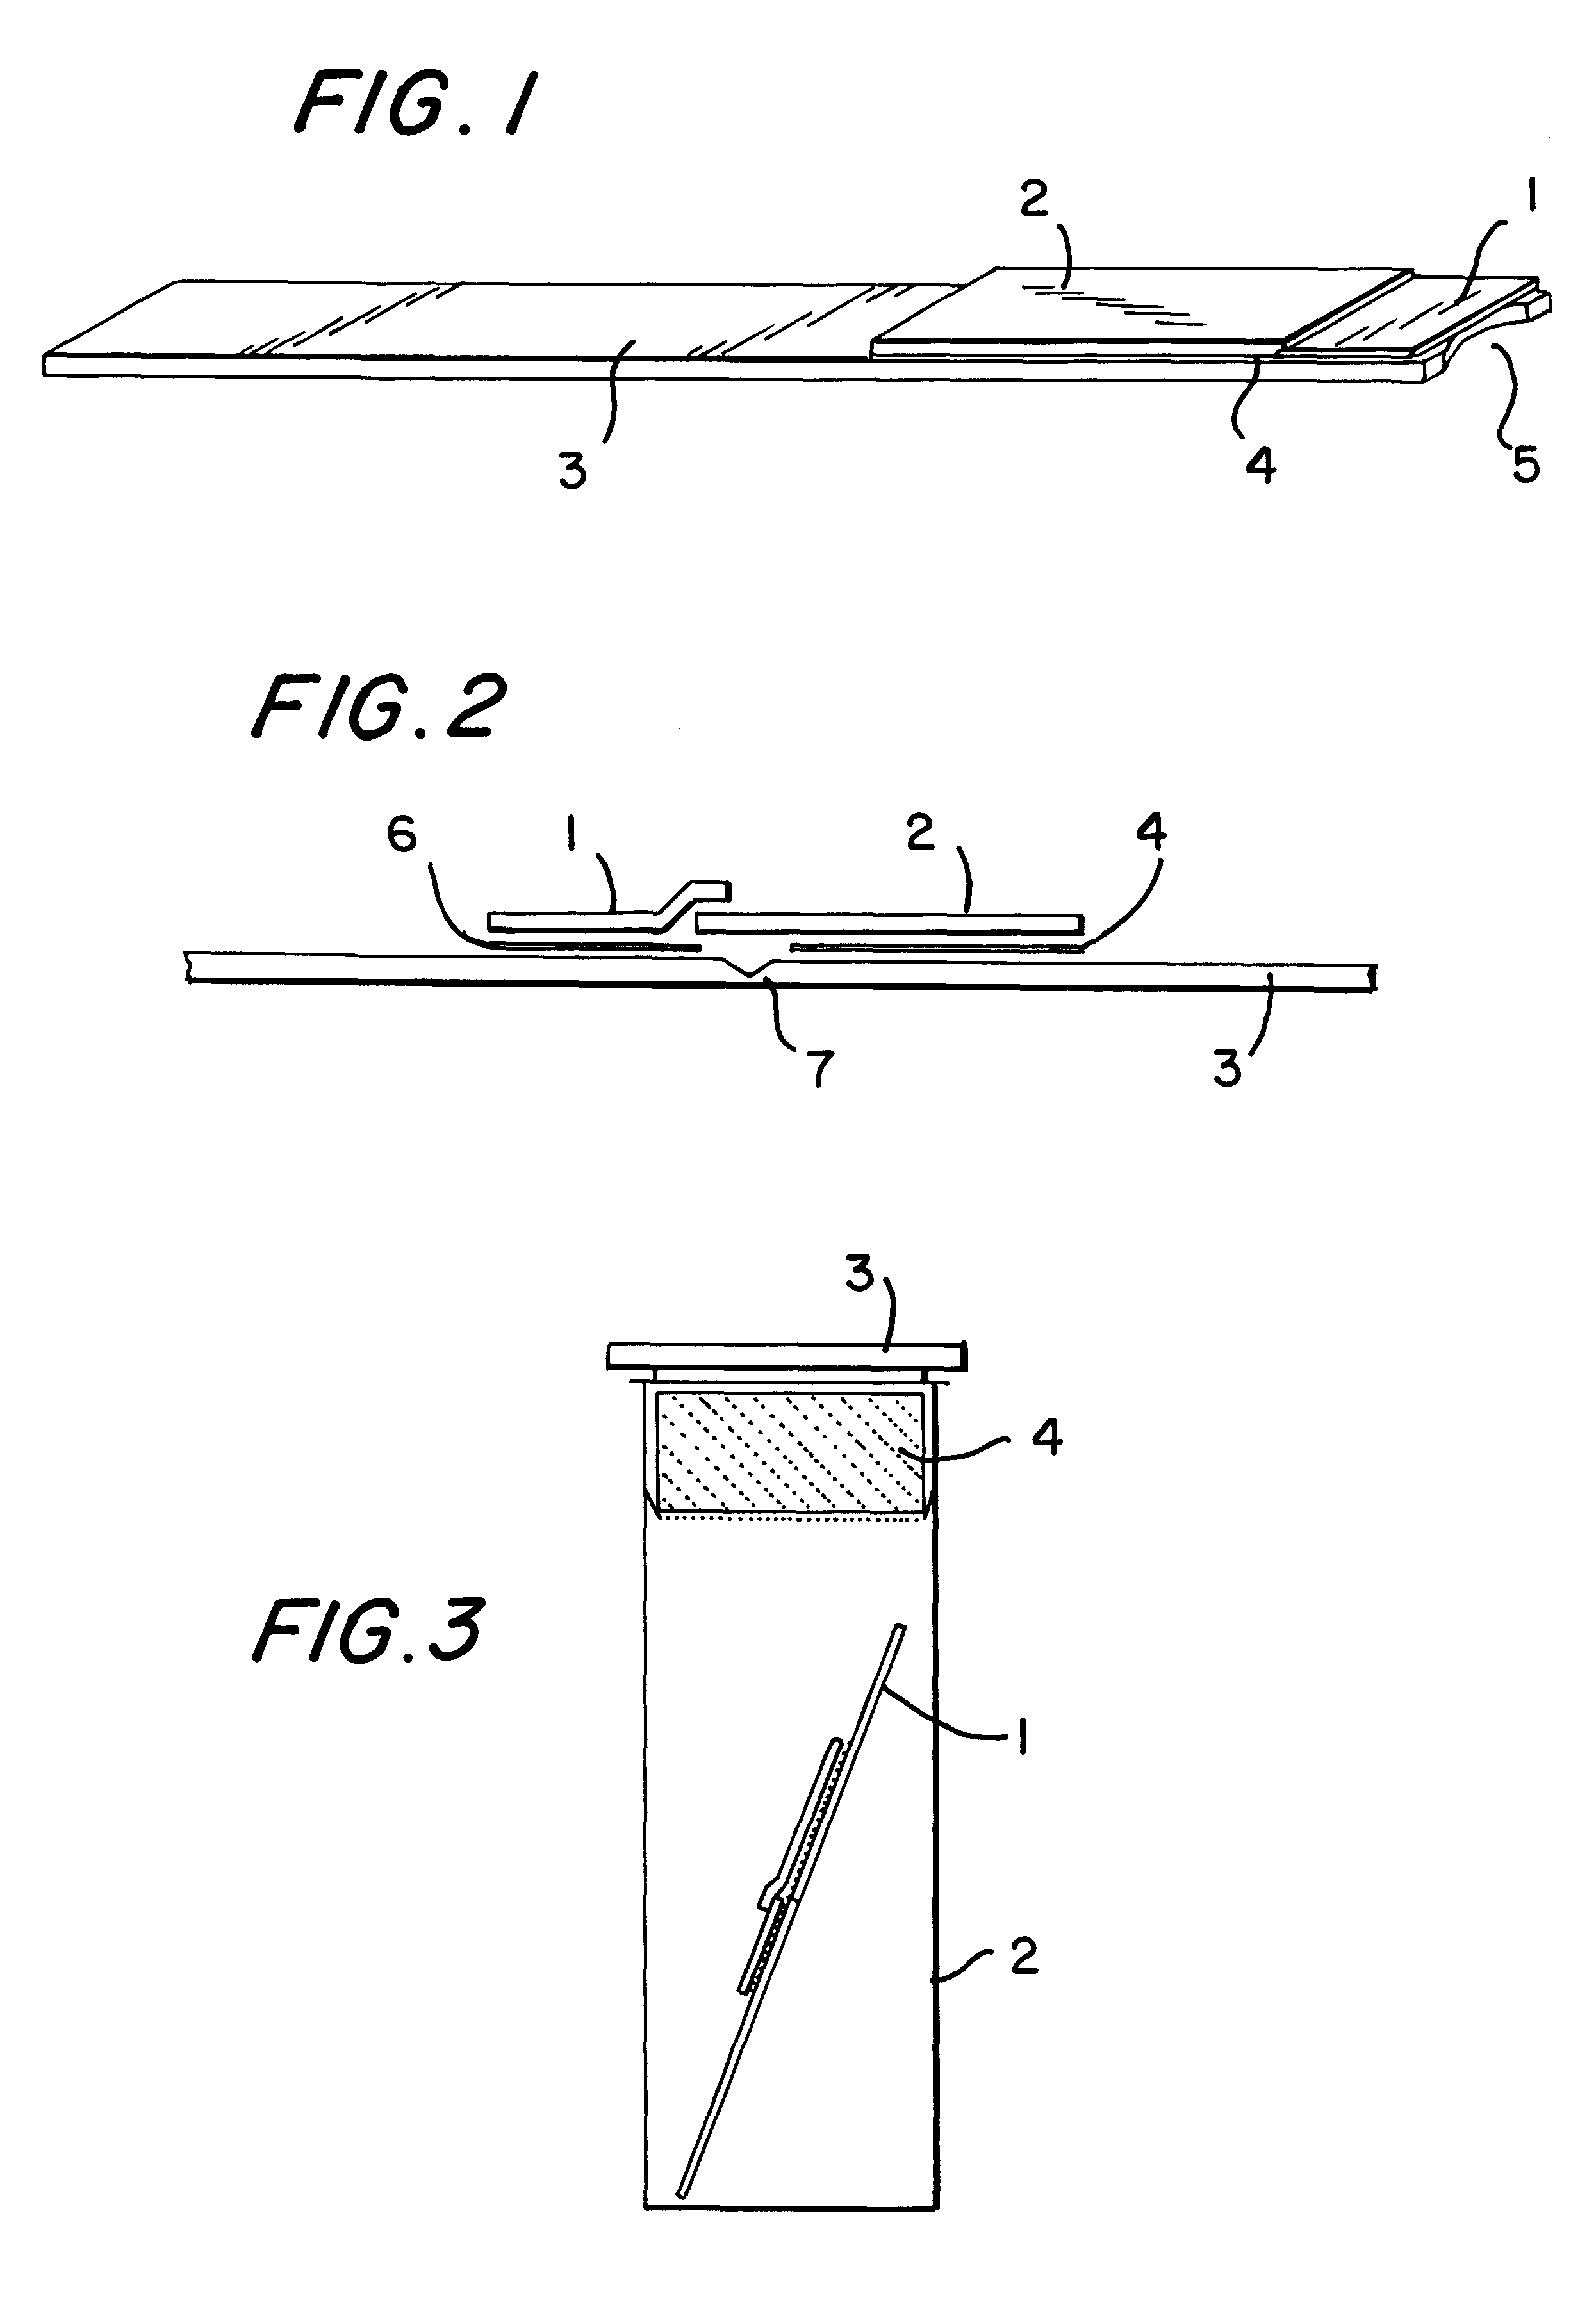 Storage and transport system for sample material